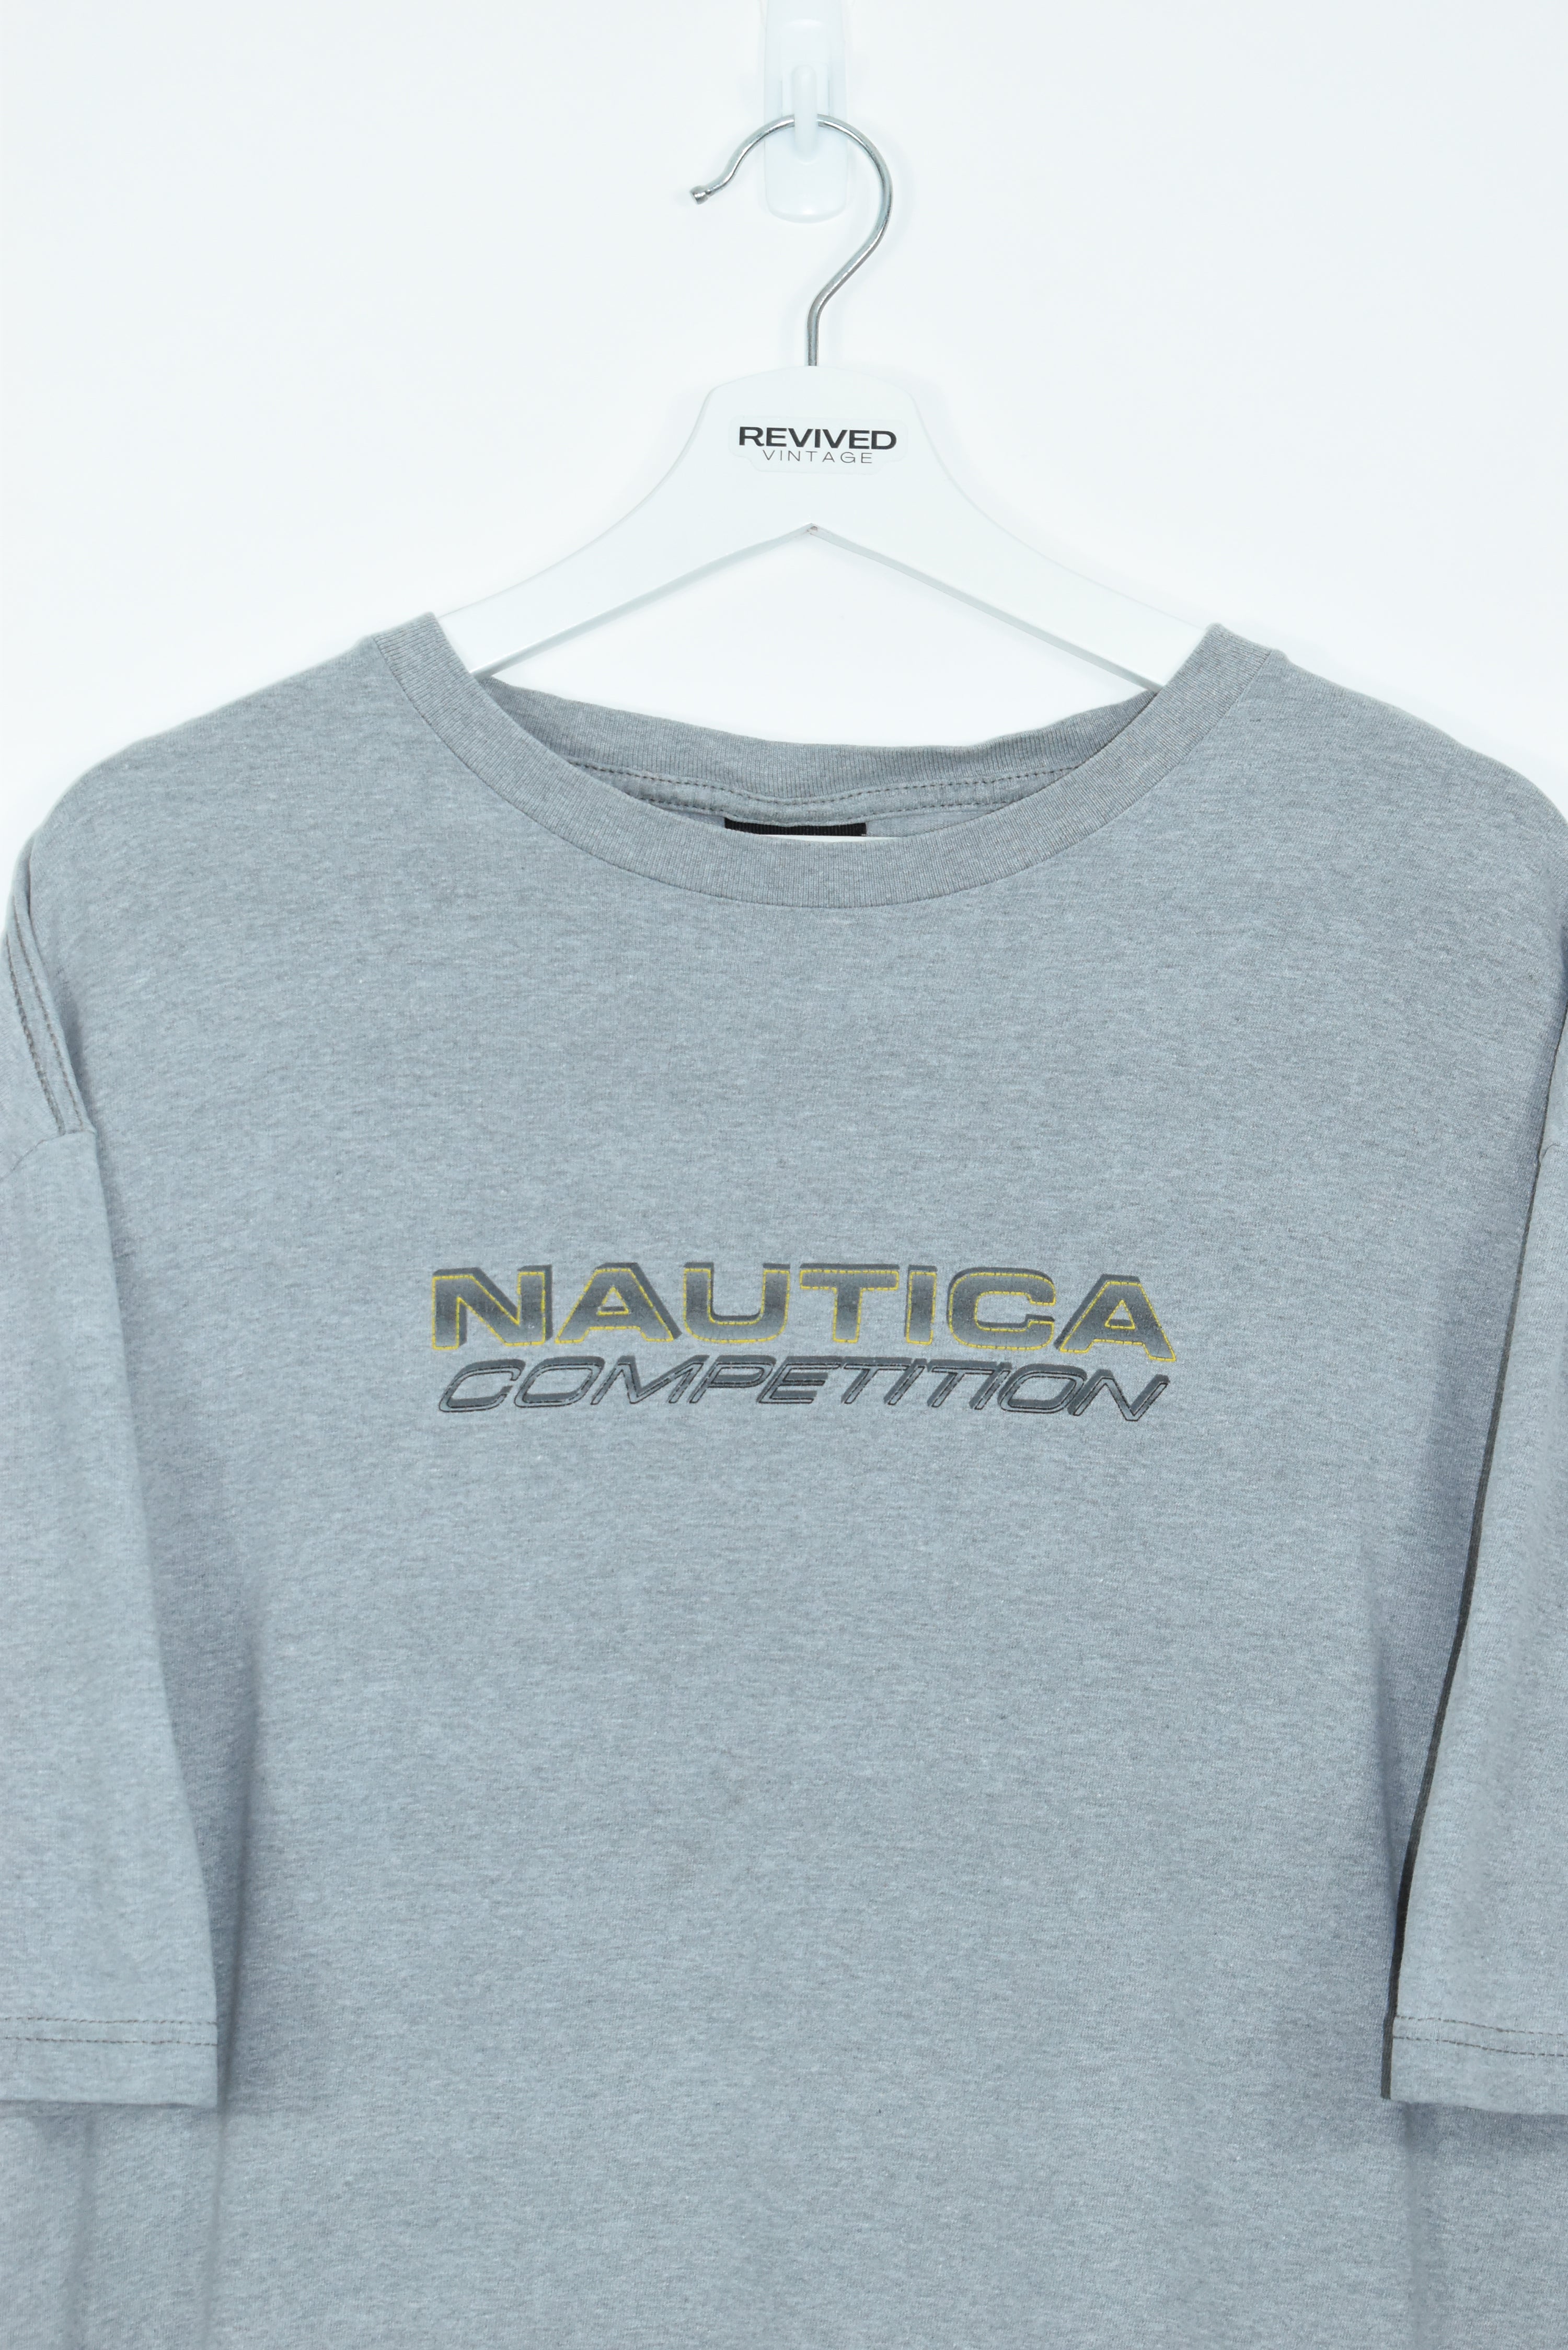 Vintage Nautica Competition Spellout T Shirt Grey Xlarge